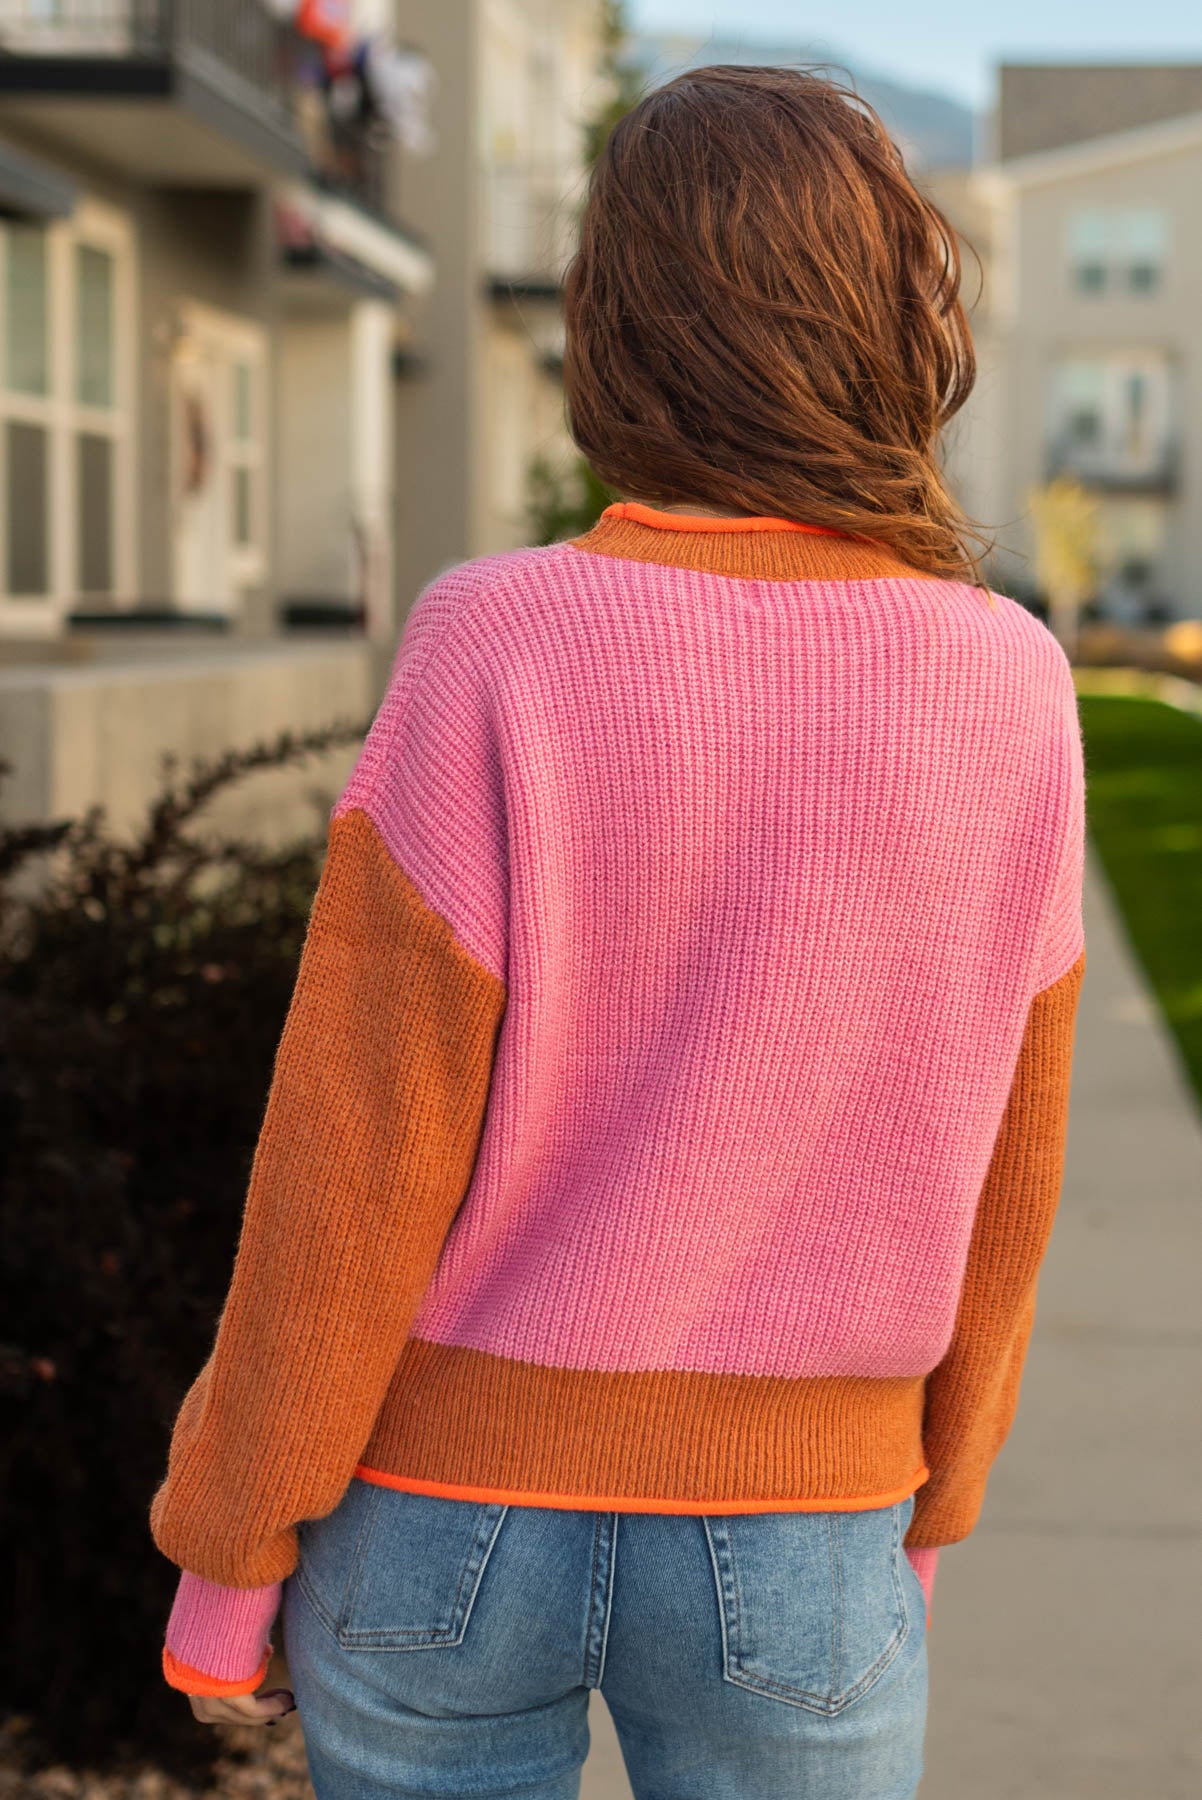 Back view of a pink sweater